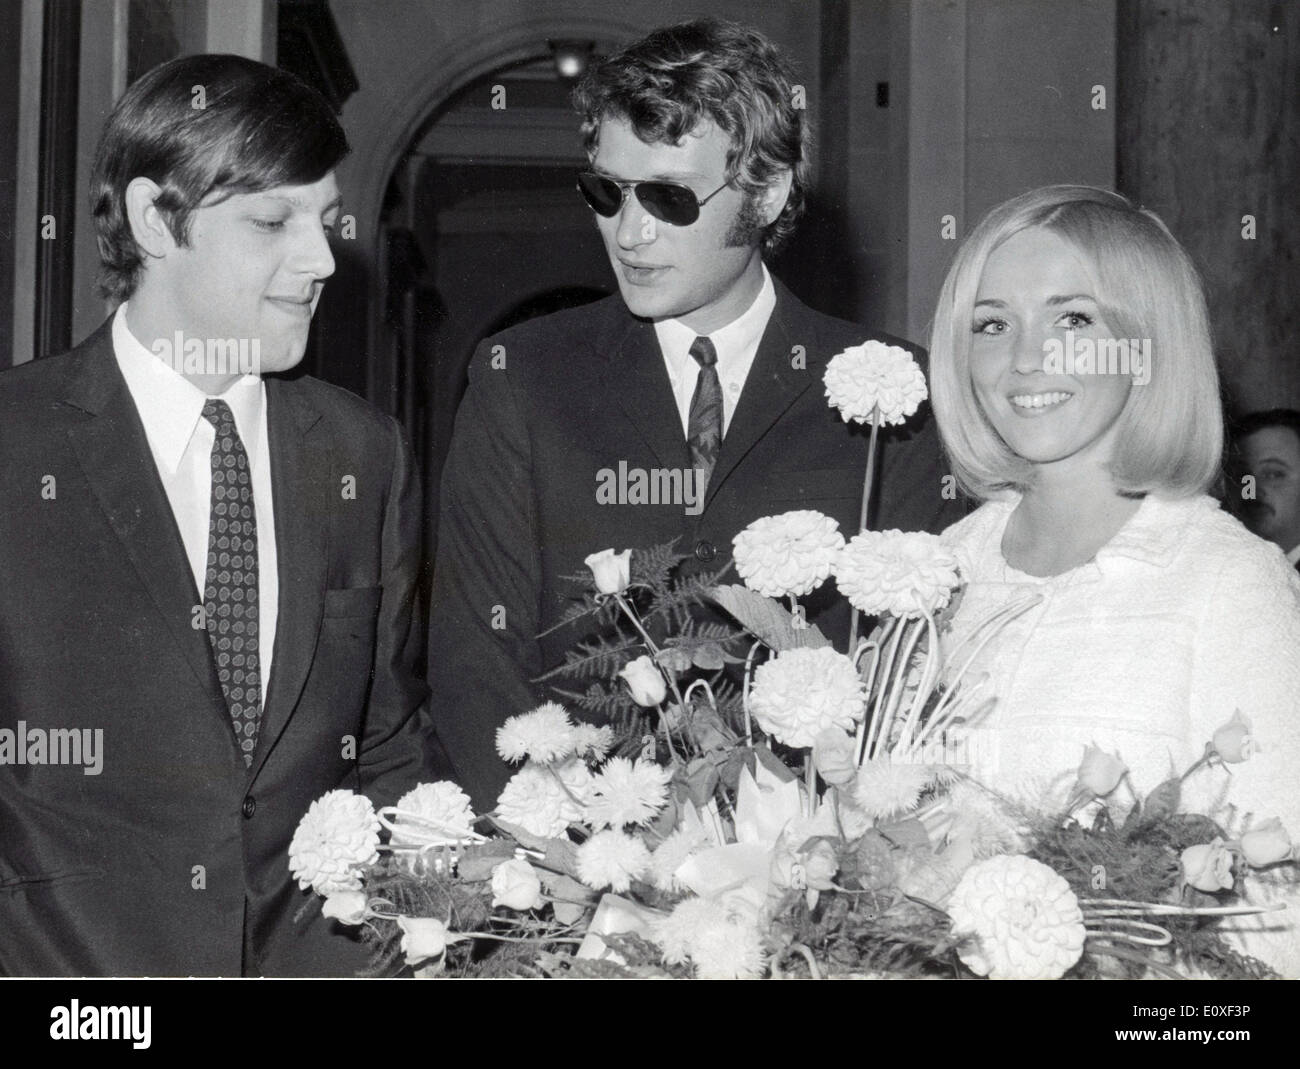 jul-20-1966-paris-france-johnny-hallyday-at-his-brother-in-law-eddie-E0XF3P.jpg